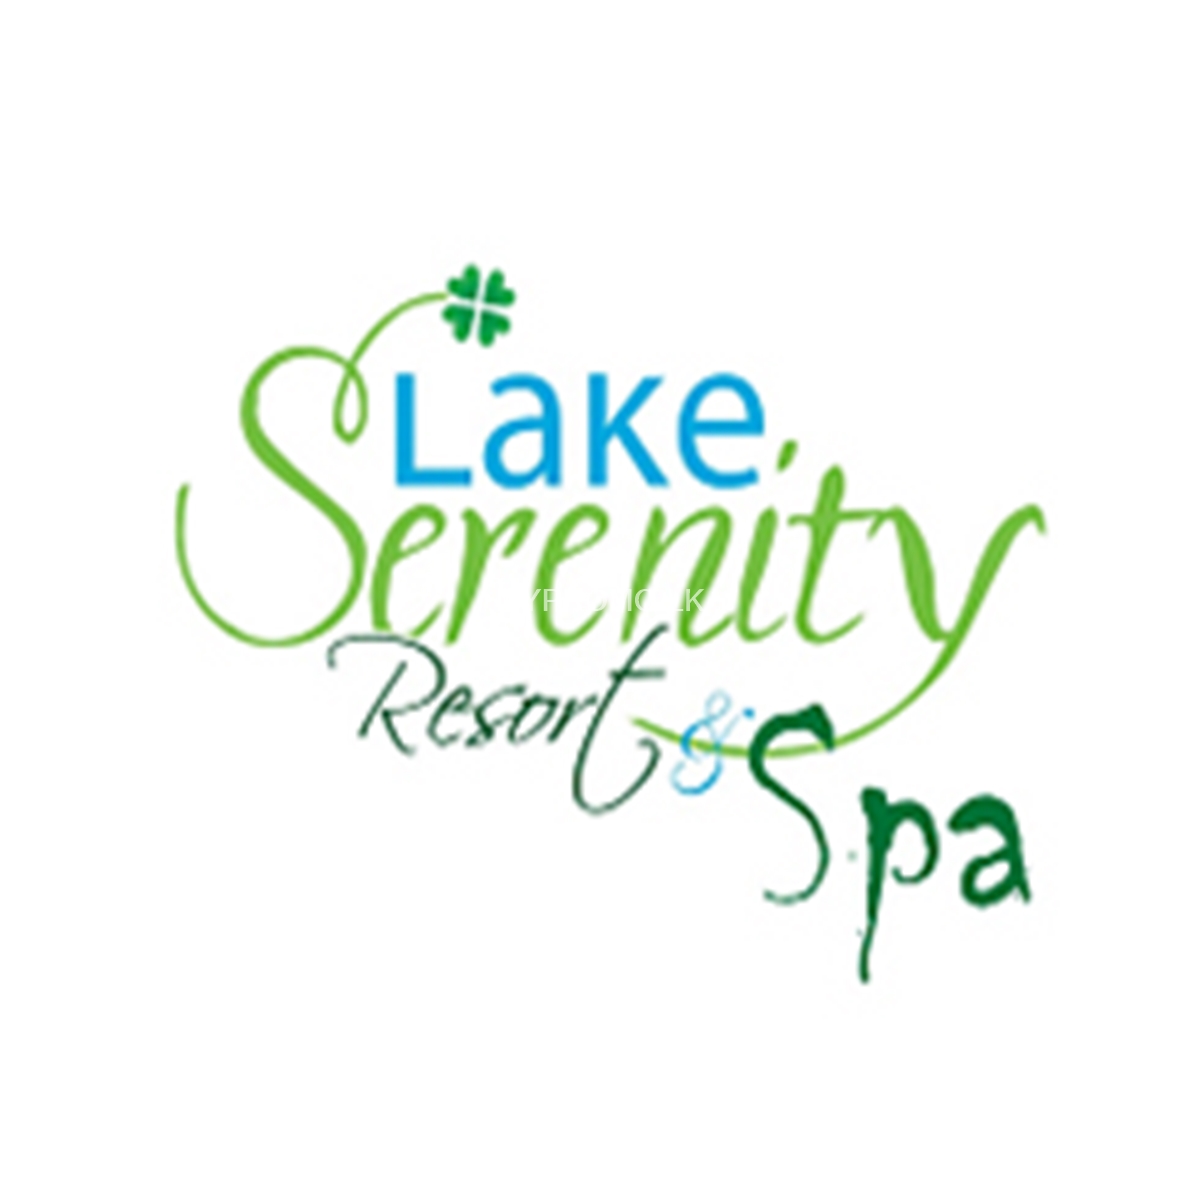 30% off (from rack rates) on Half board and Full board basis at Lake Serenity Resort and Spa for HNB Credit/ Debit Cards